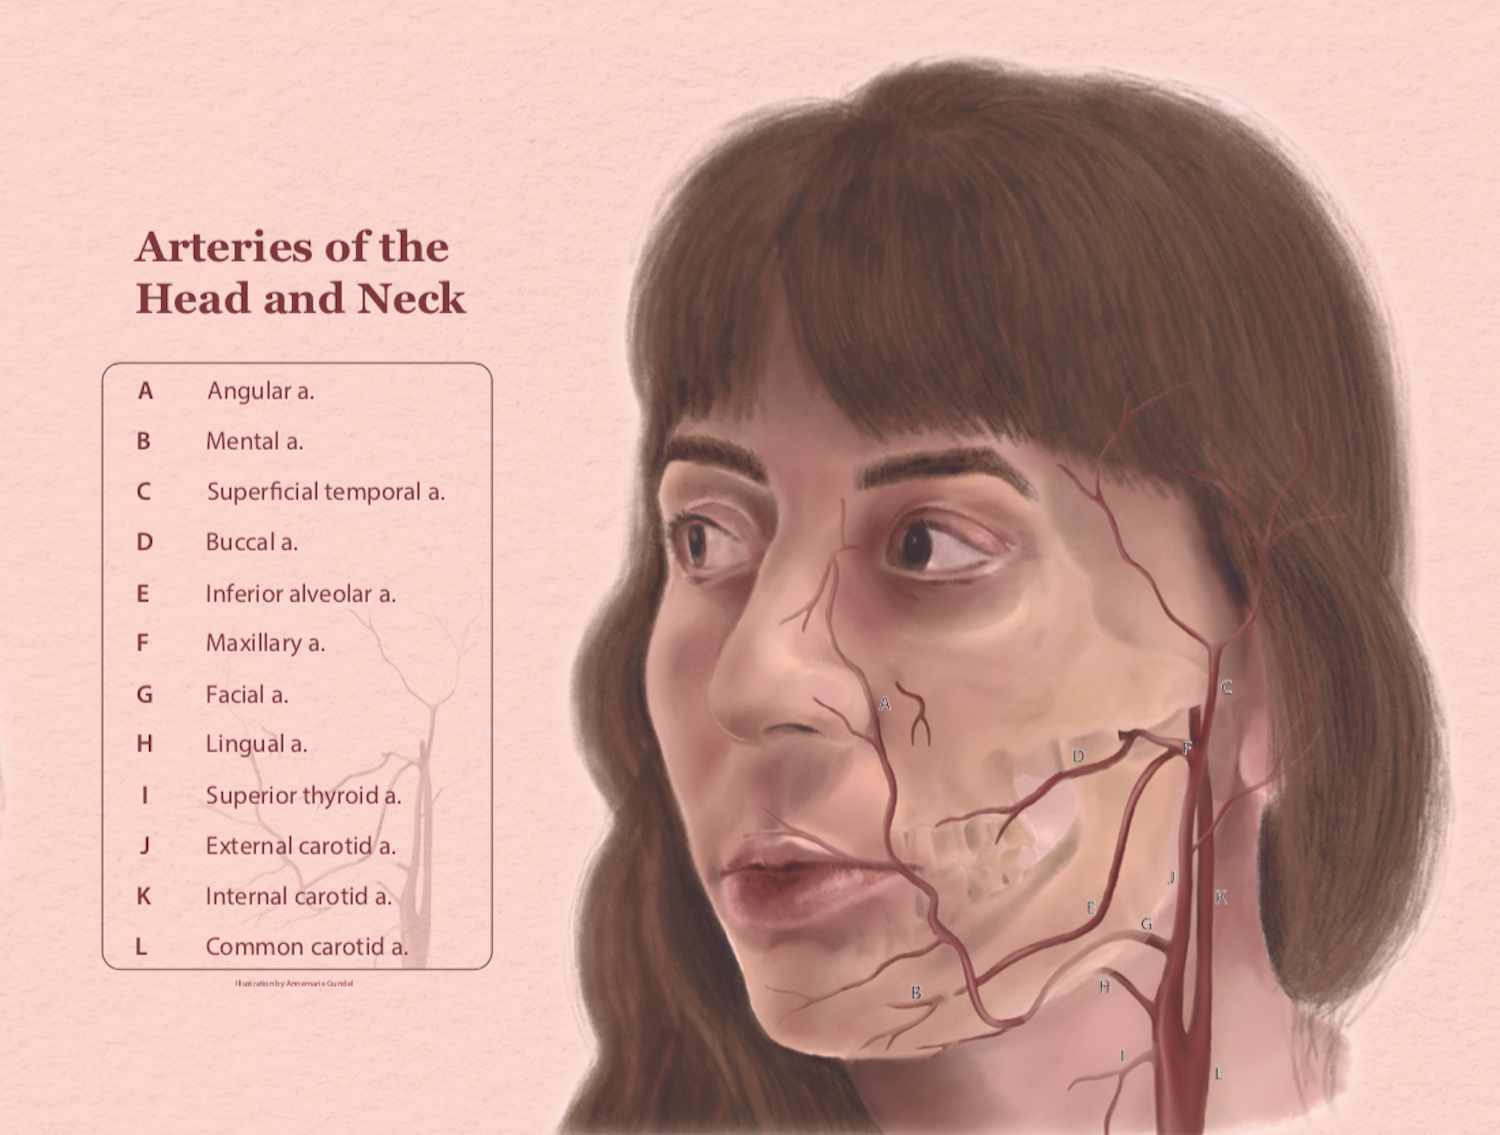 Arteries of the Head and Neck Illustration